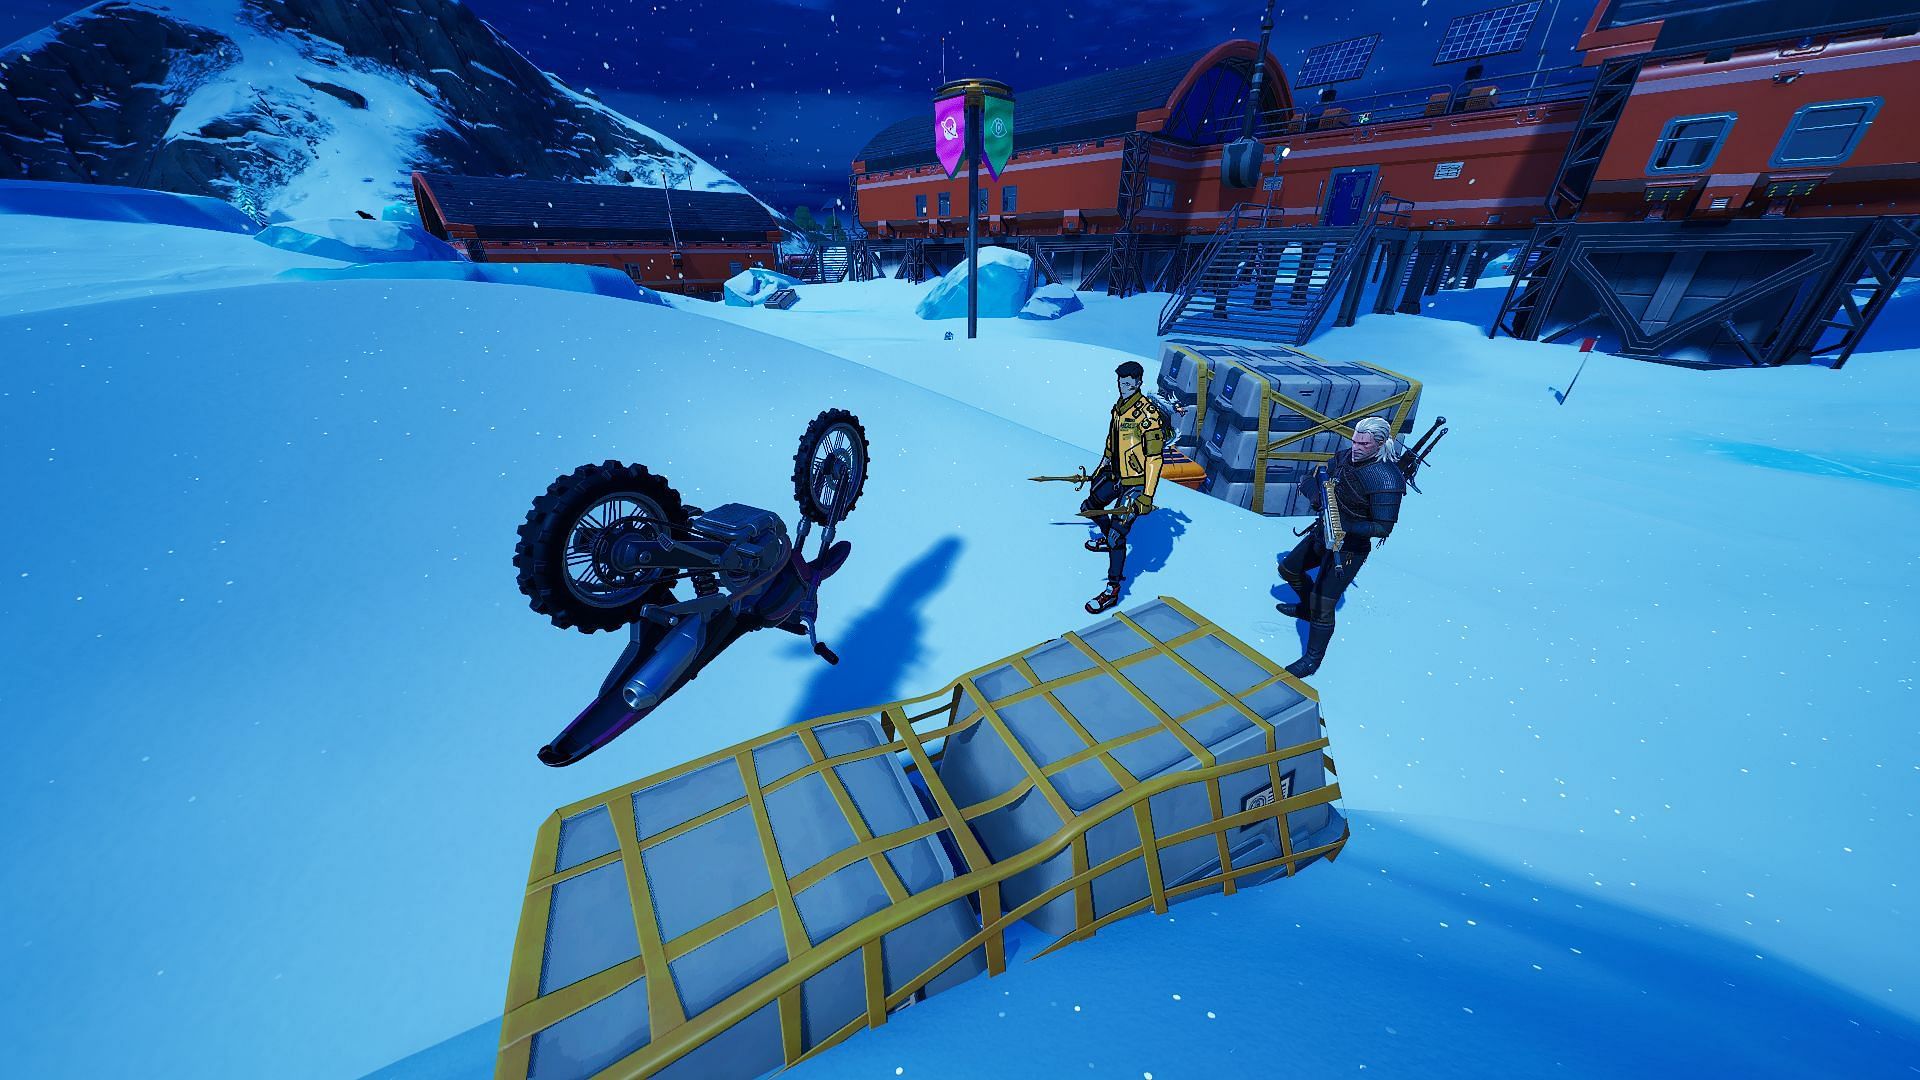 Flip the vehicle to get it back into action (Image via Epic Games/Fortnite)